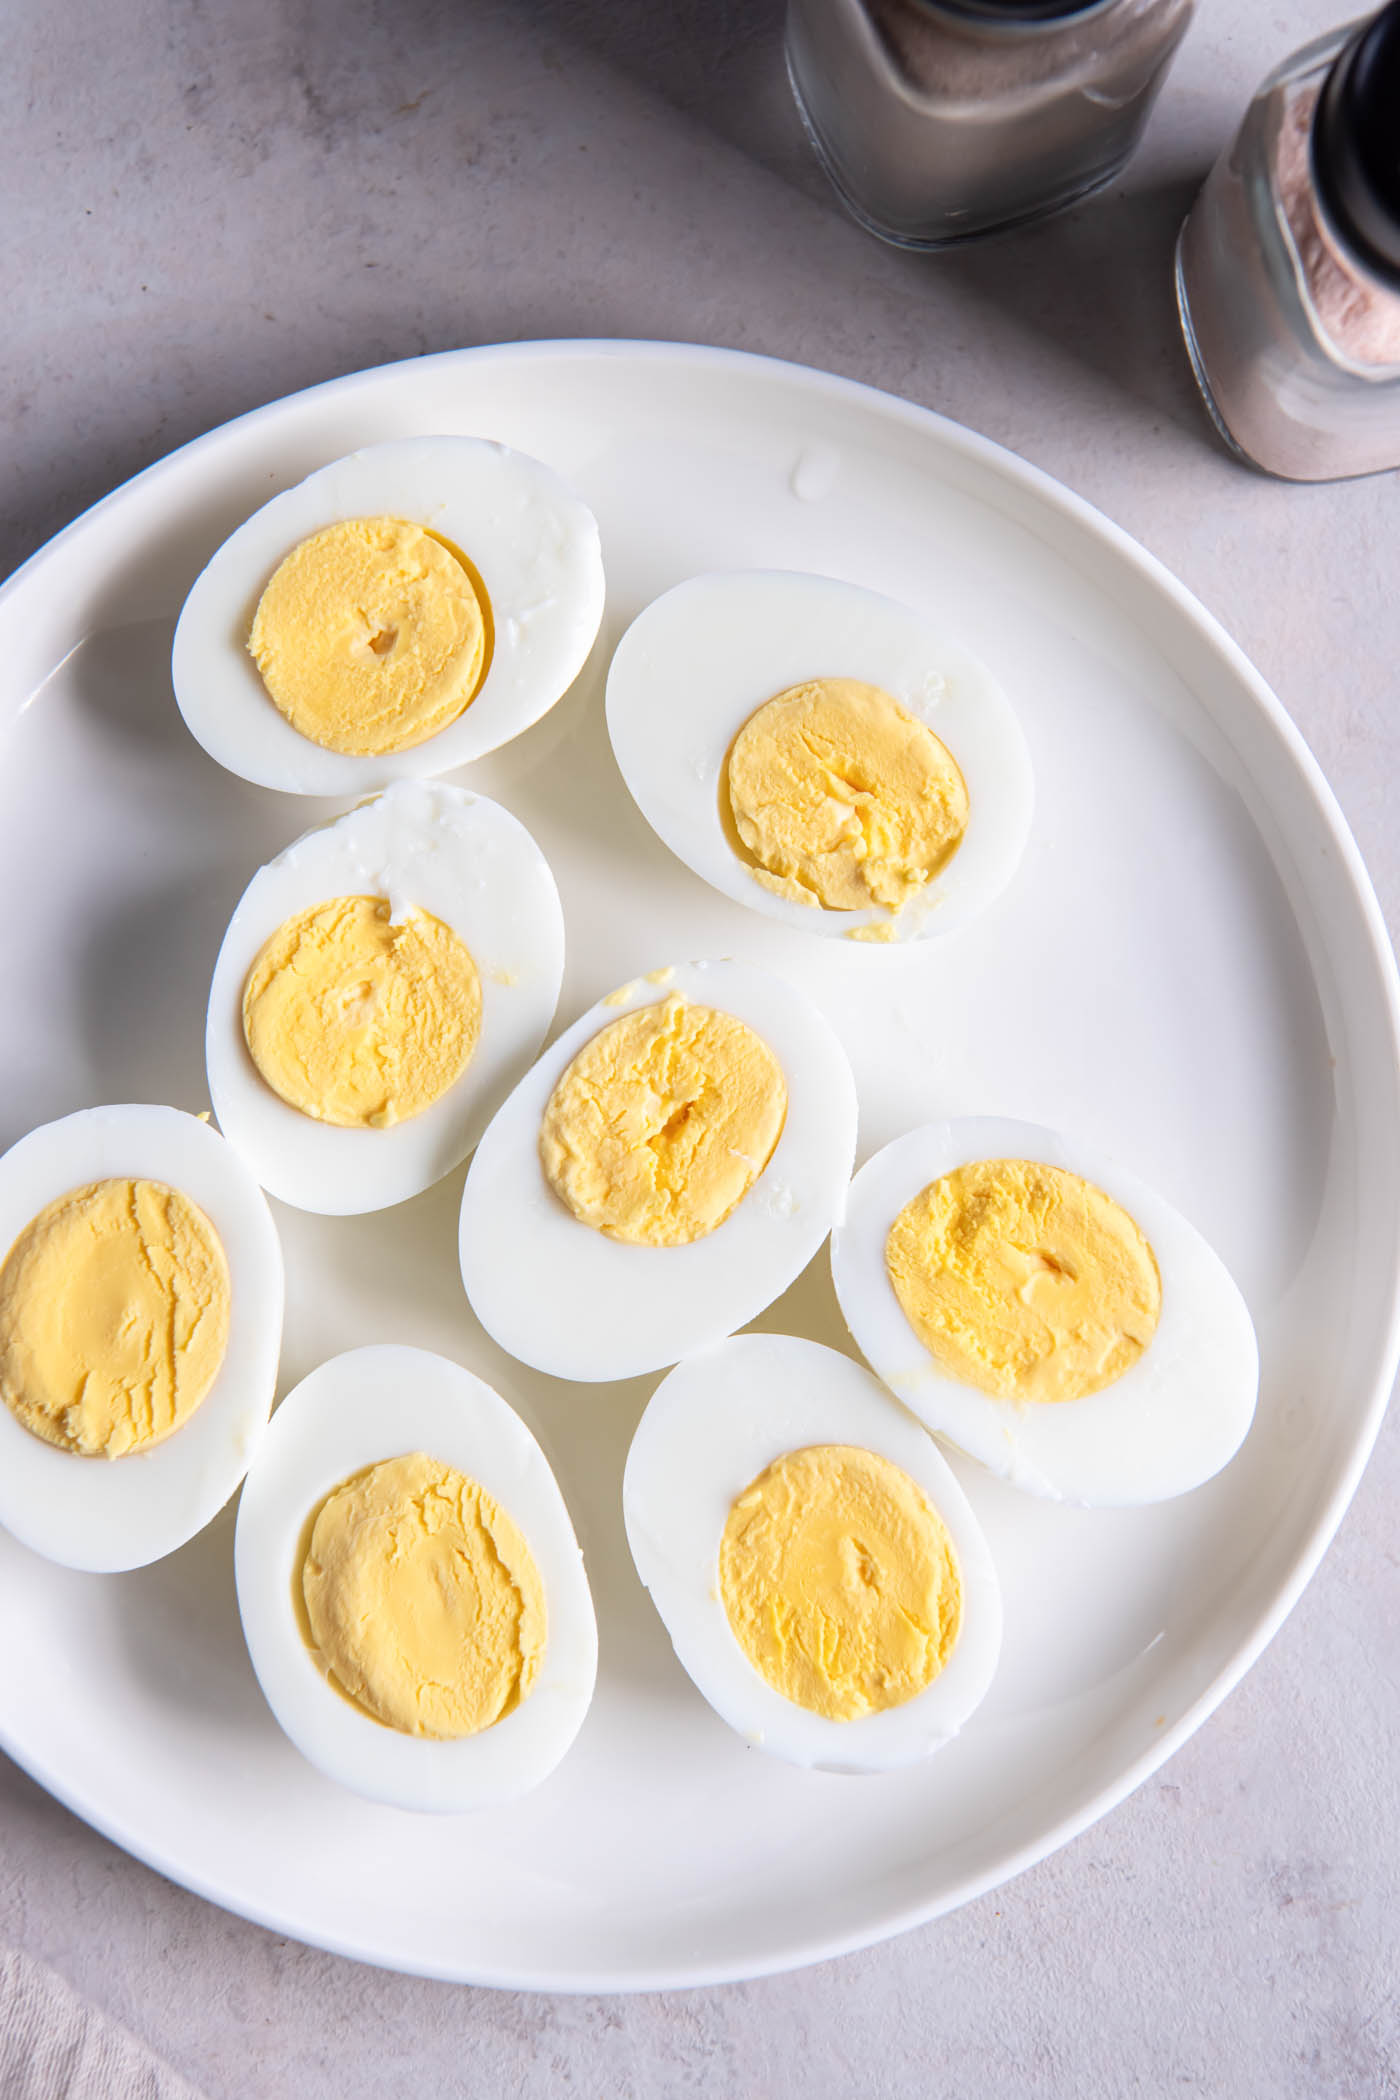 Hard boiled eggs cut in half on a plate.